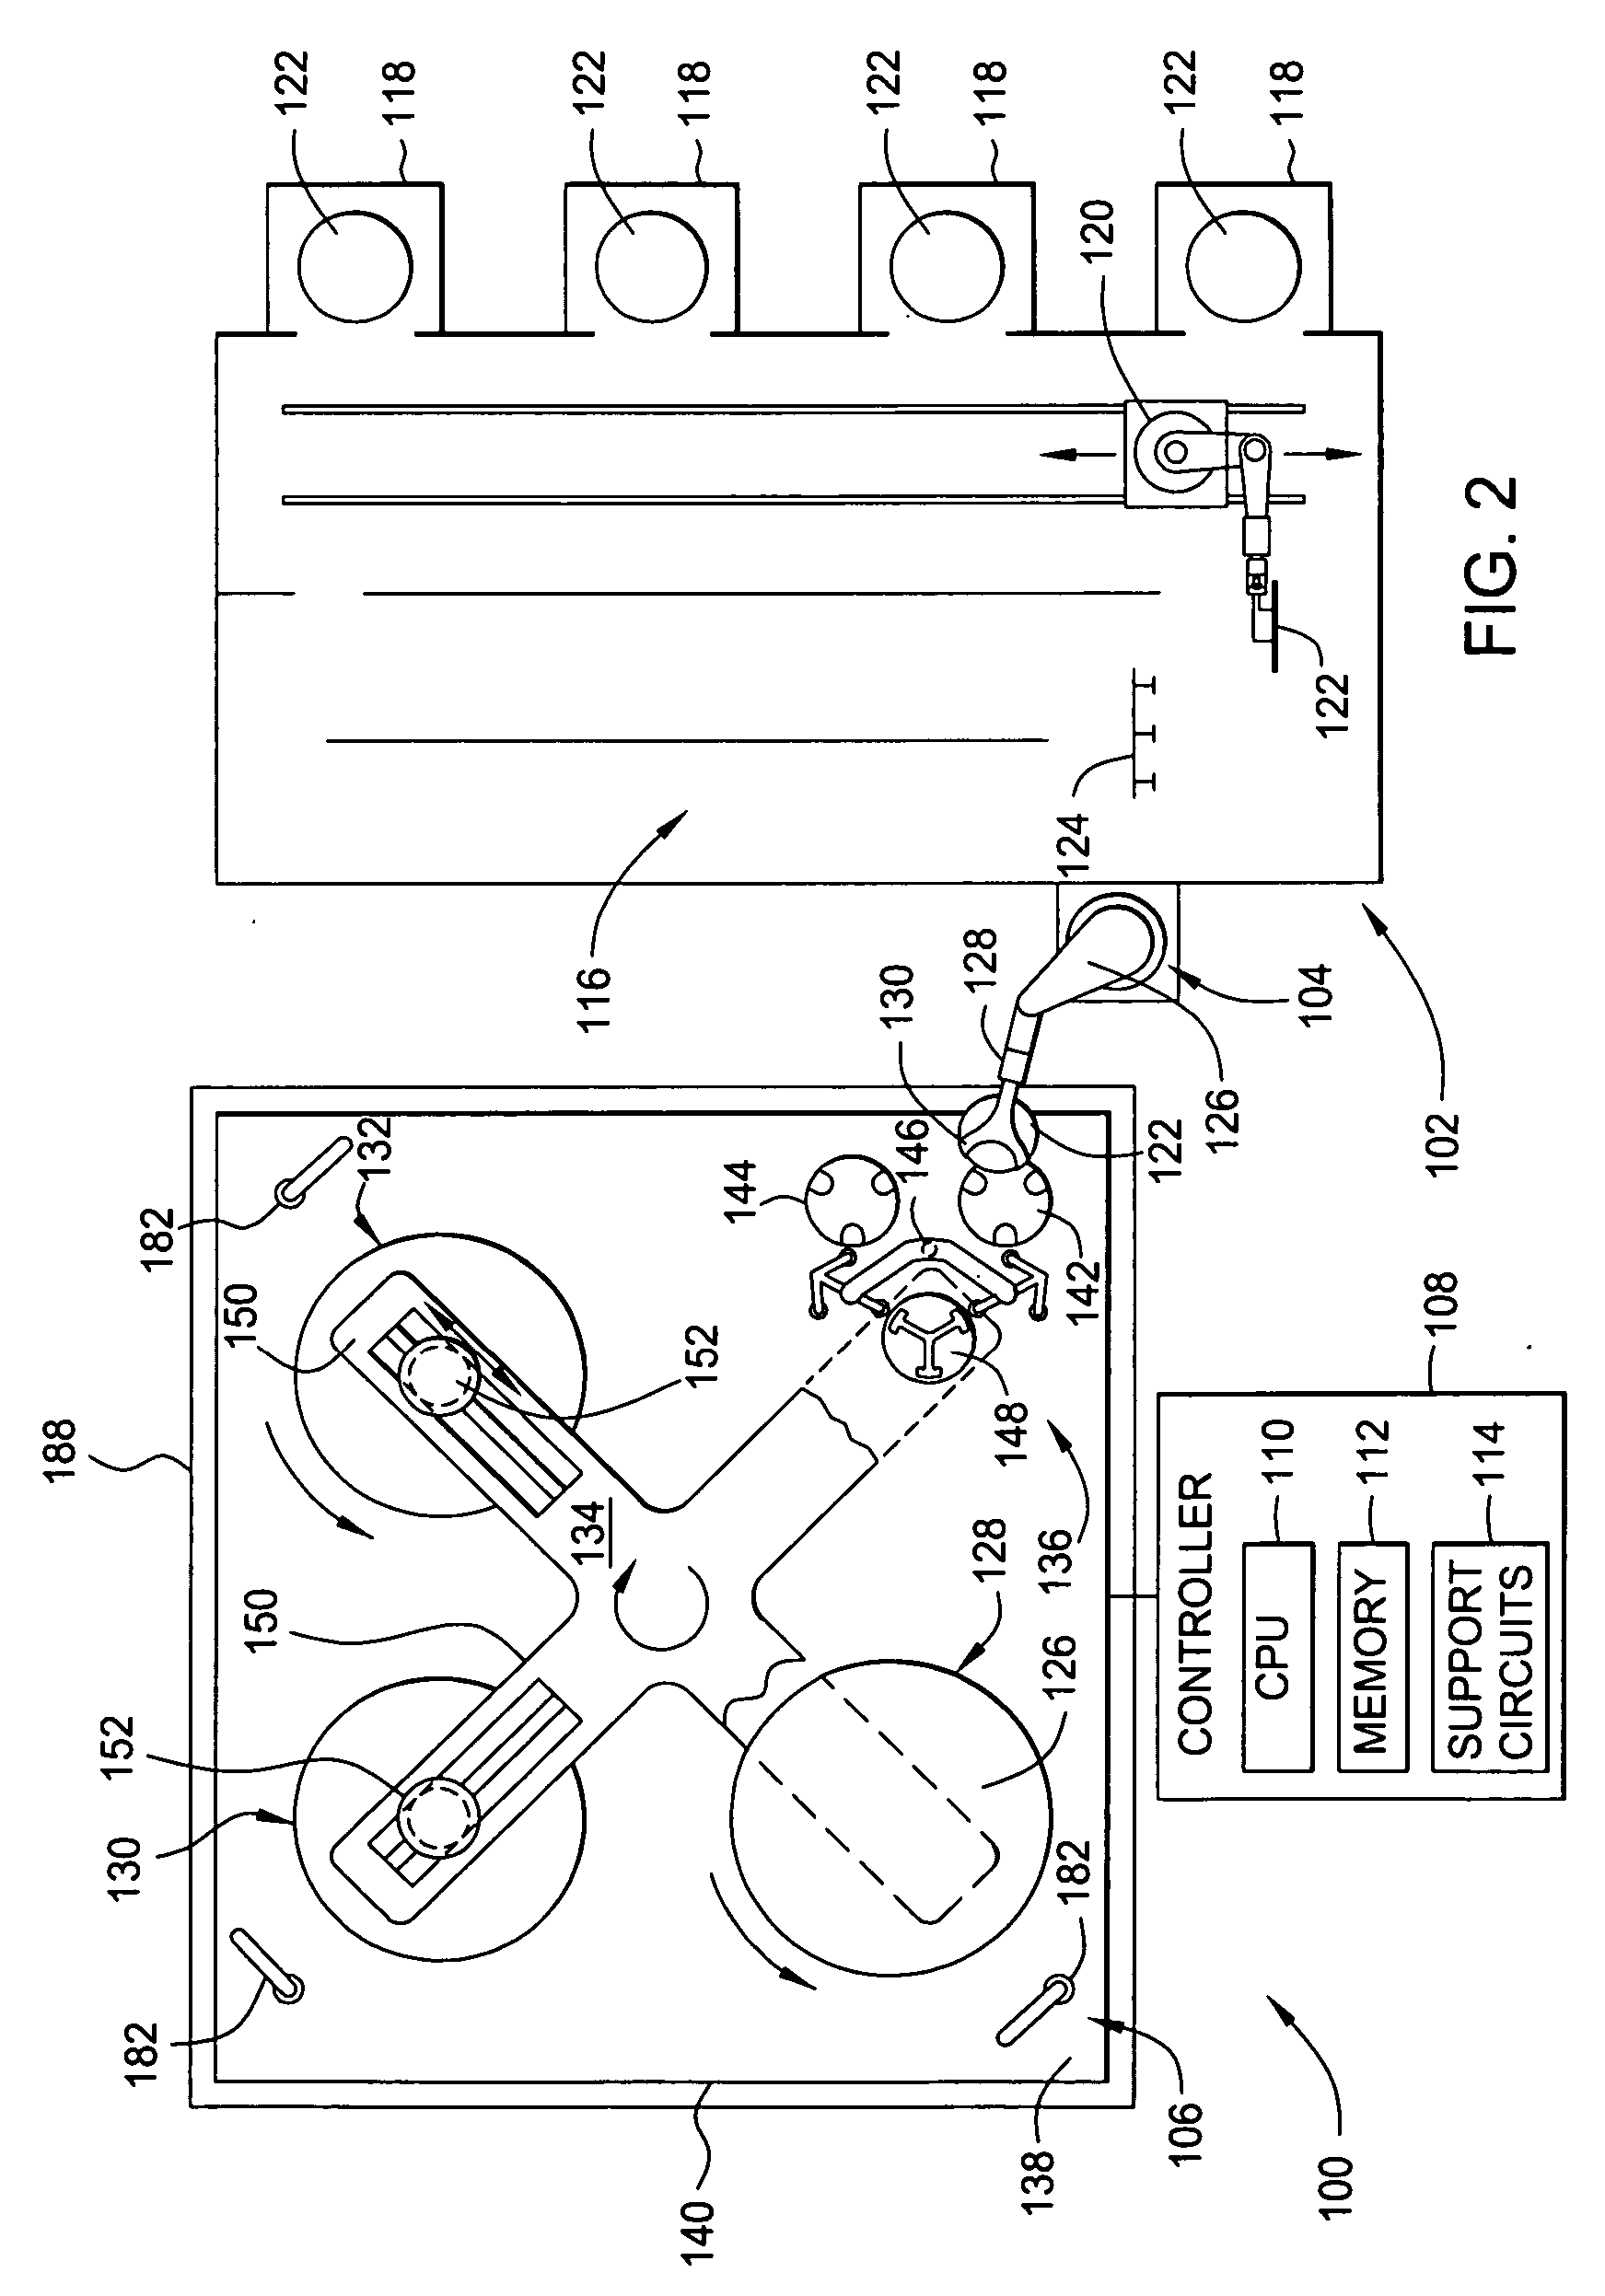 Method and composition for polishing a substrate